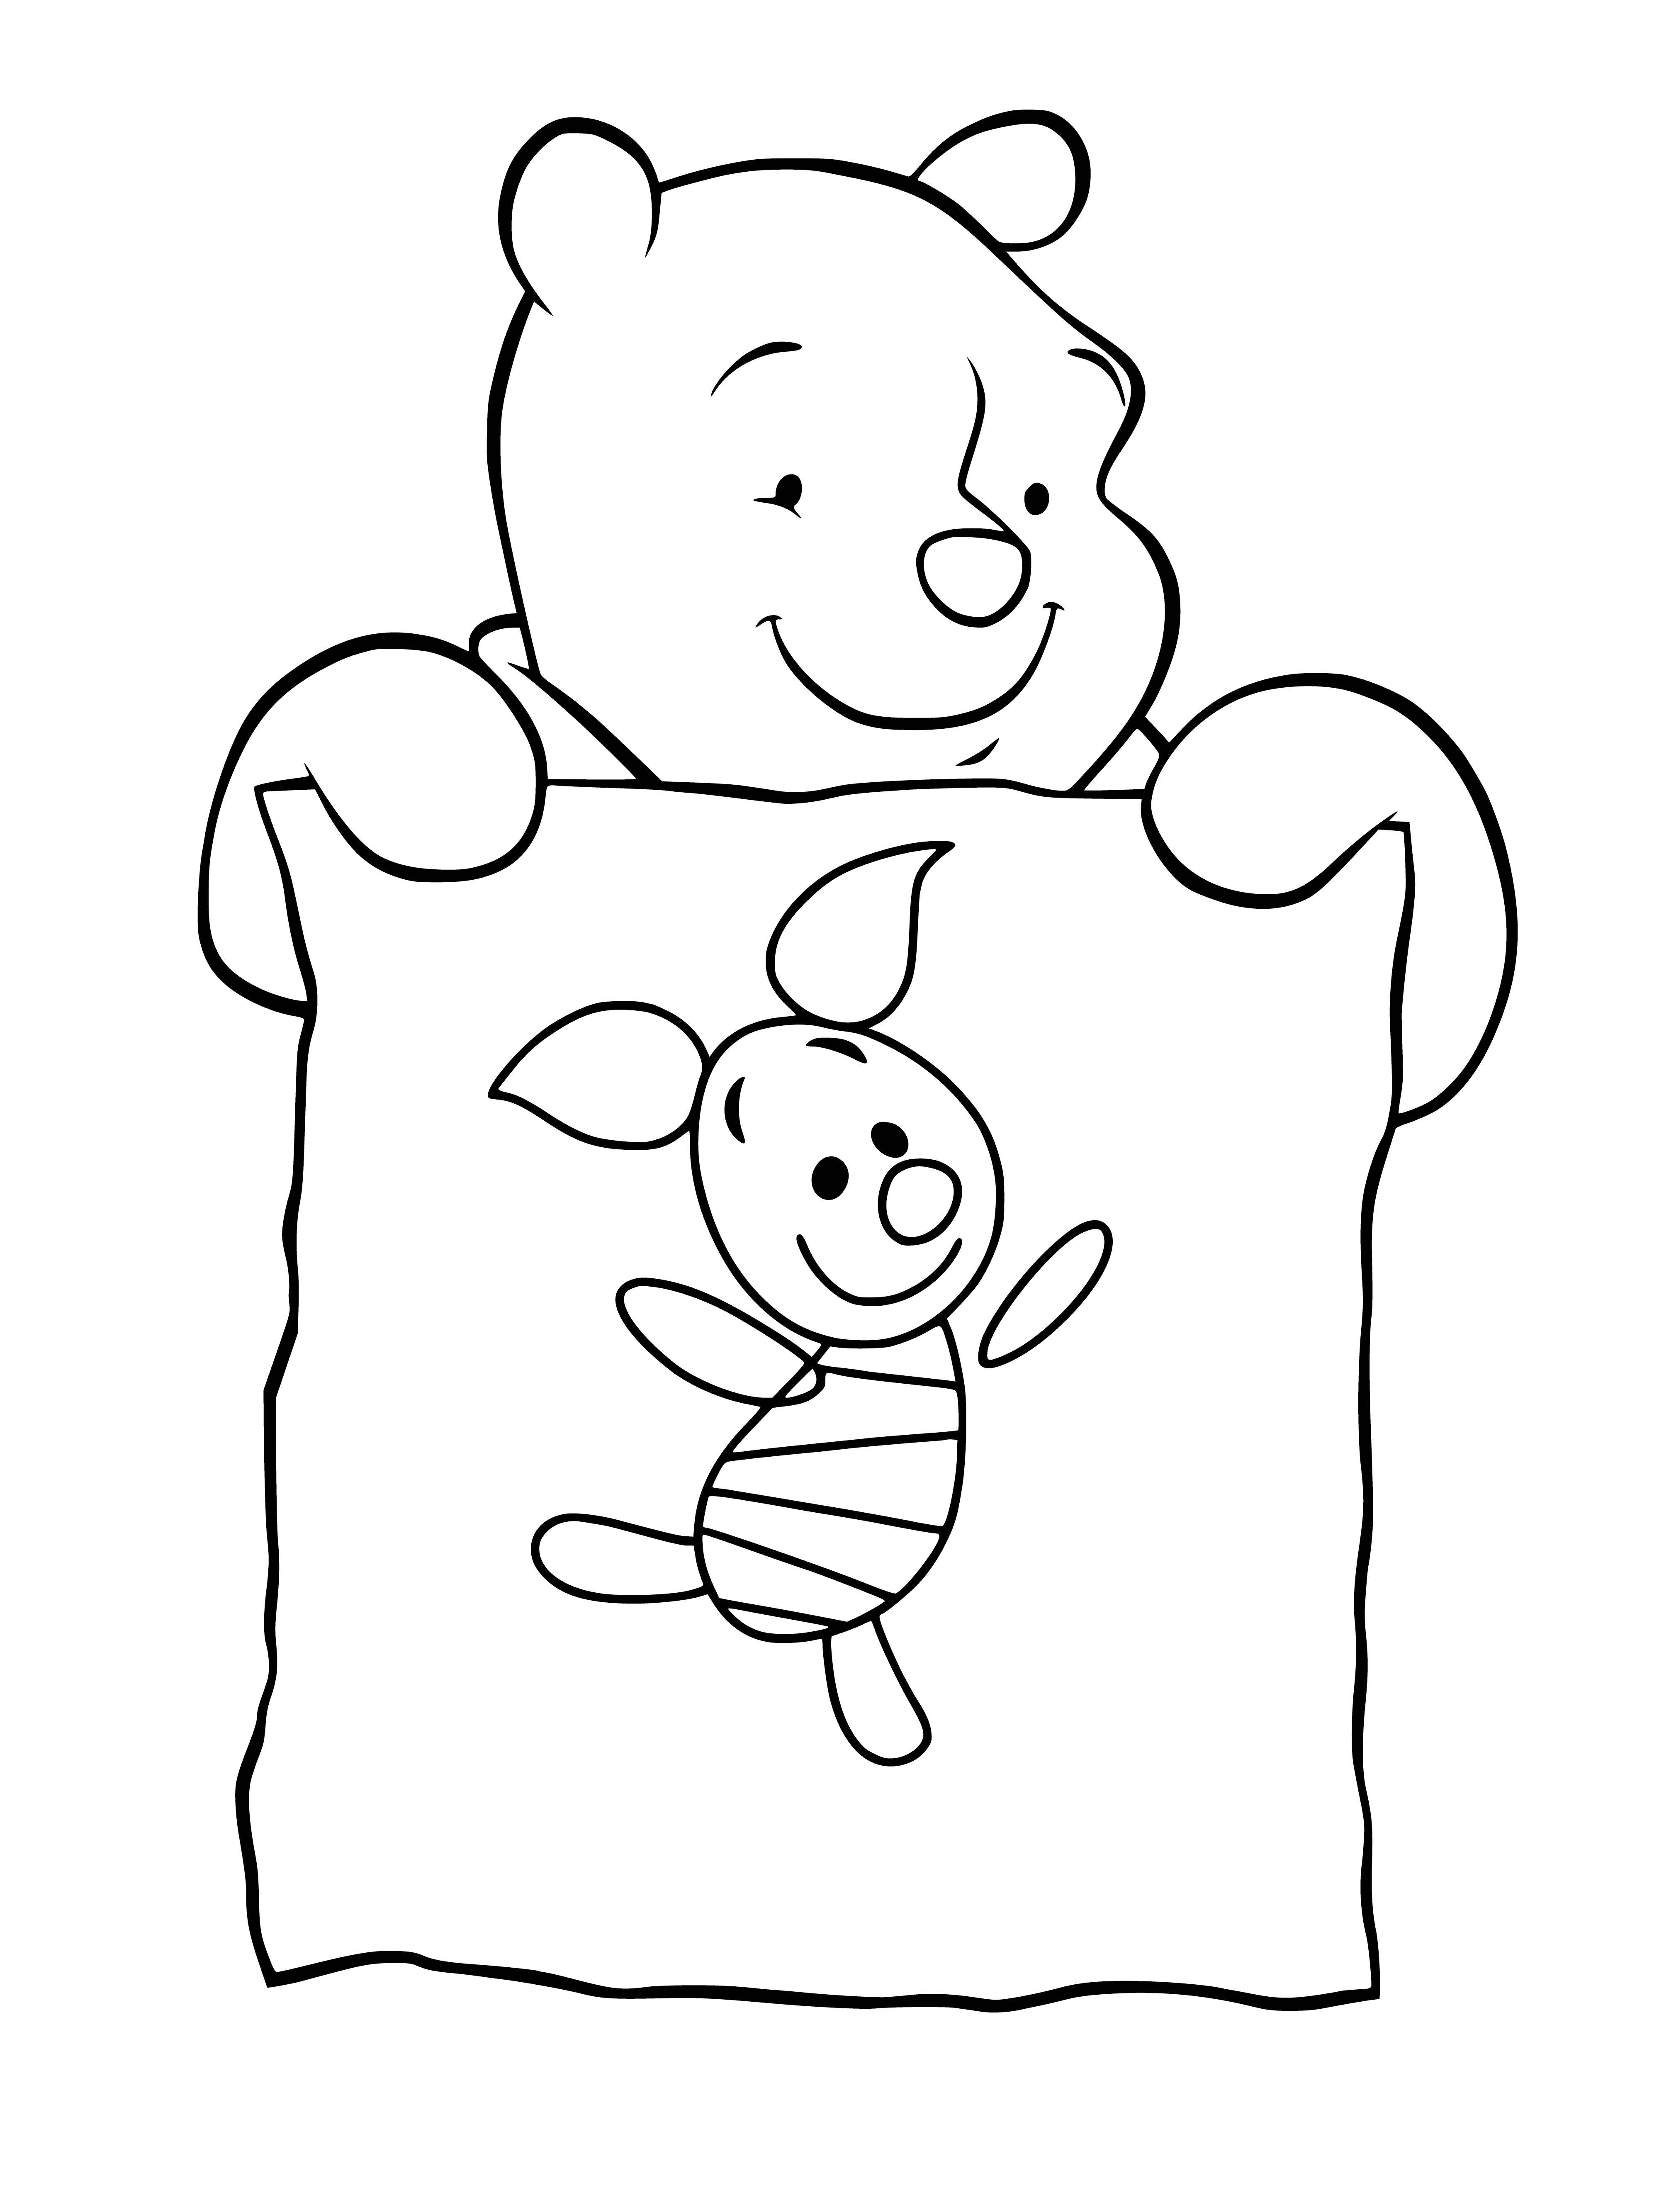 coloring page: A tree with a small house in its center. Left: small trees. Right: large hole with a bear, donkey, & bird facing the tree.